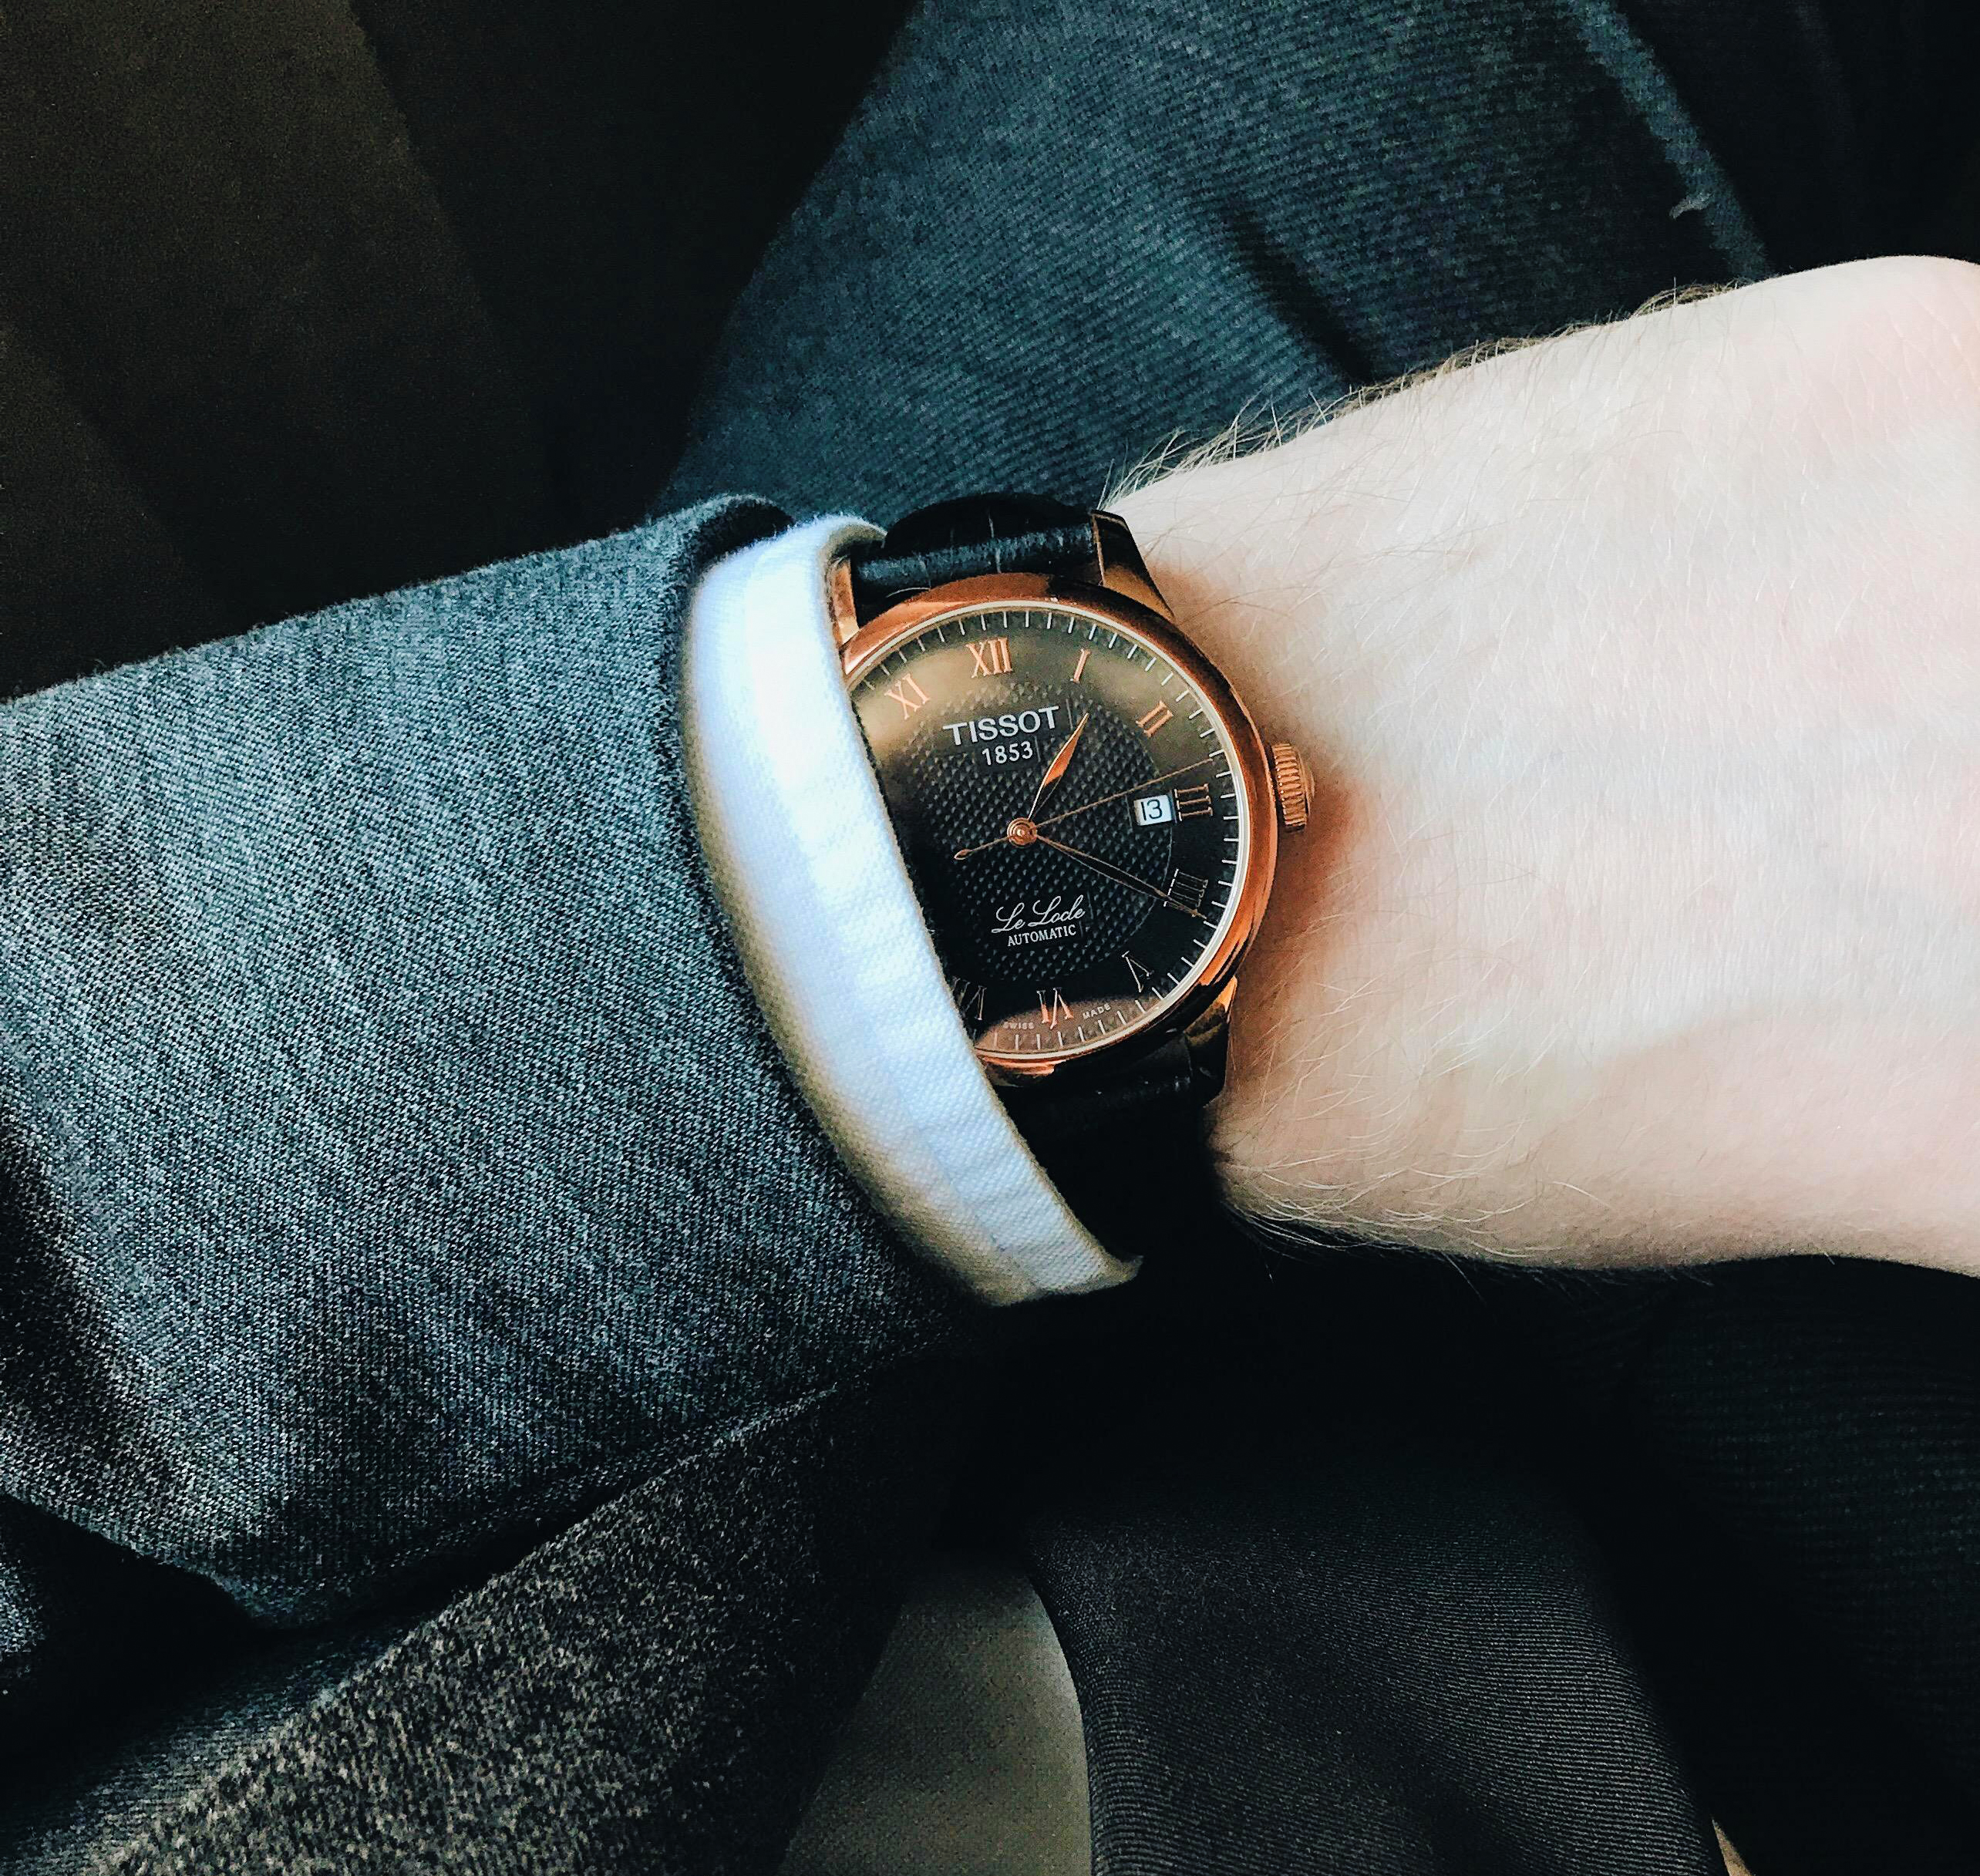 Chrono watch with shirt and suit